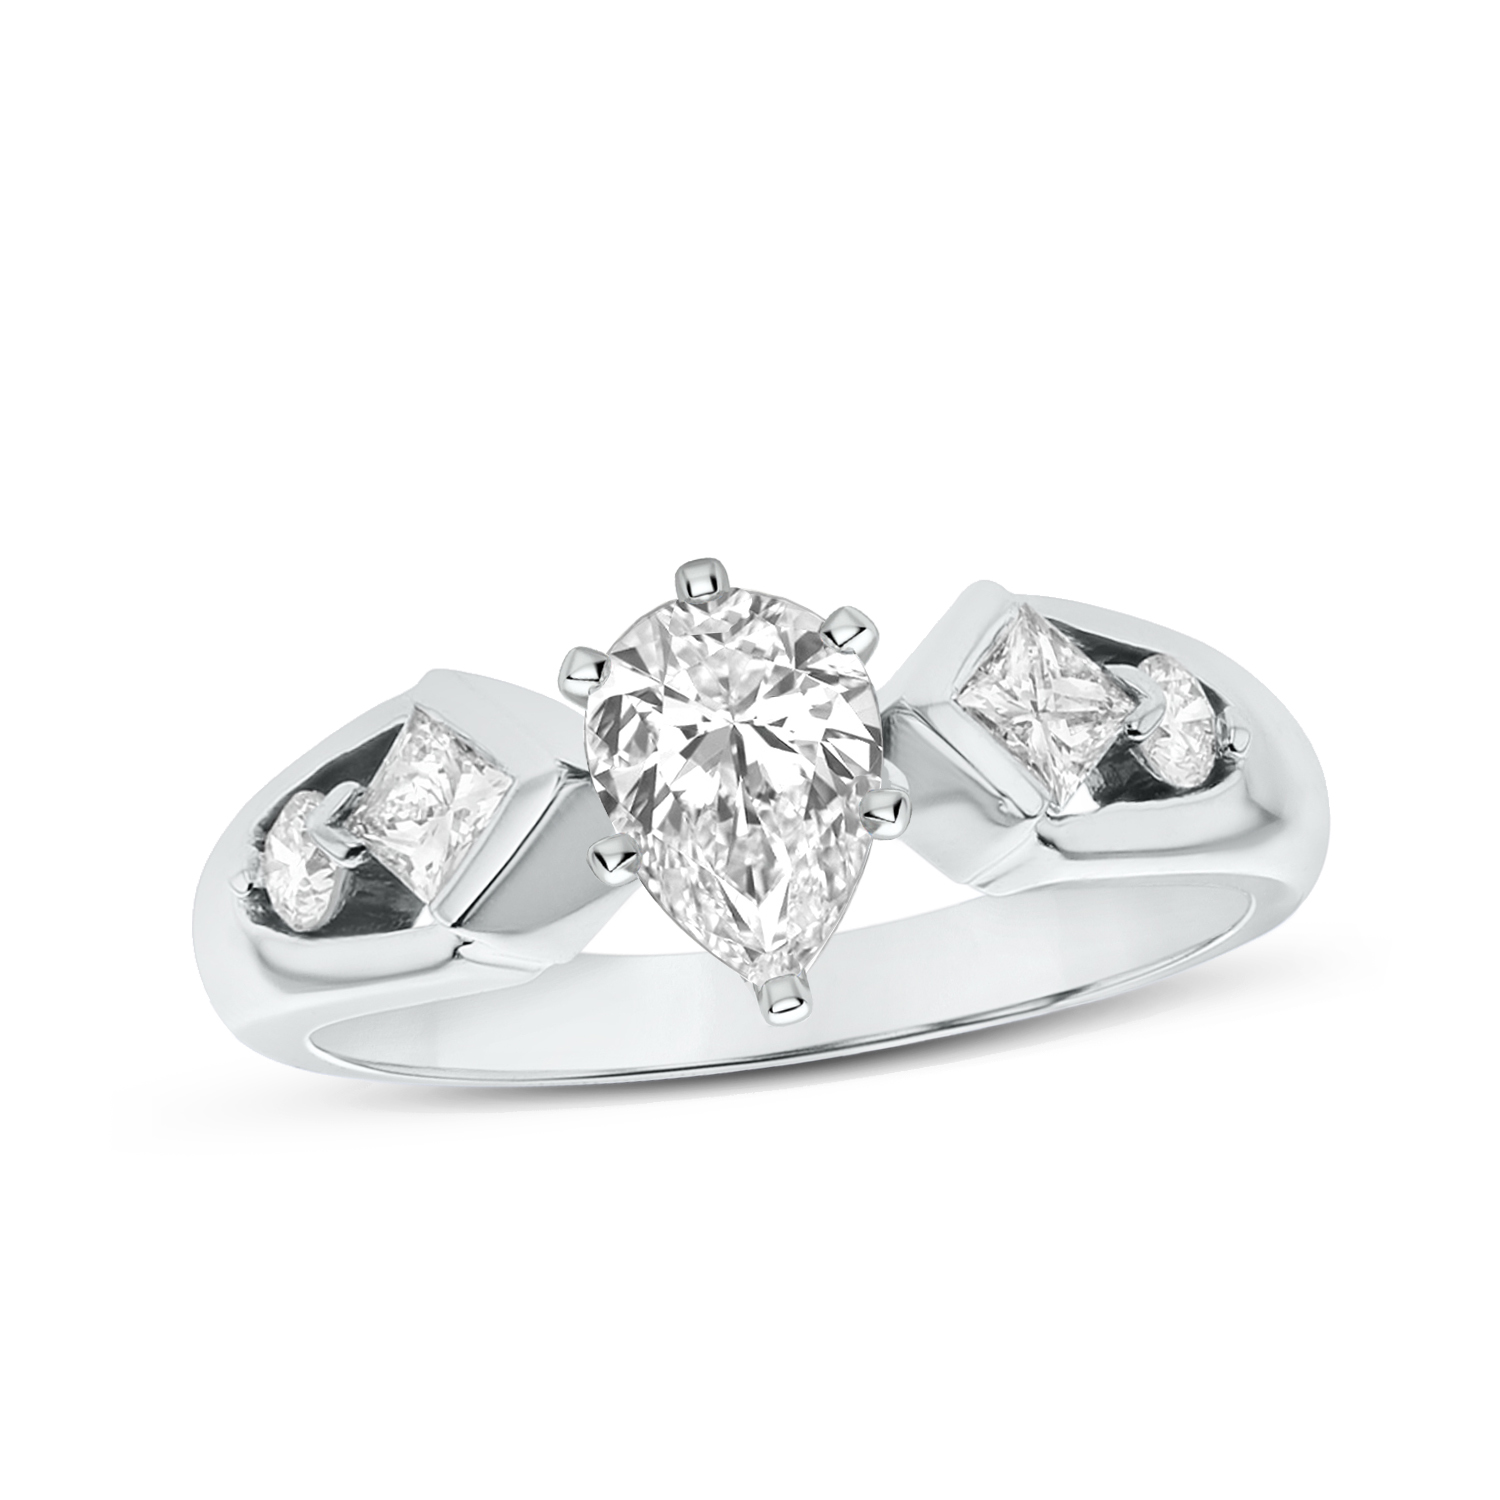 View 1.00ctw Diamond Engagement Ring in 14k WG